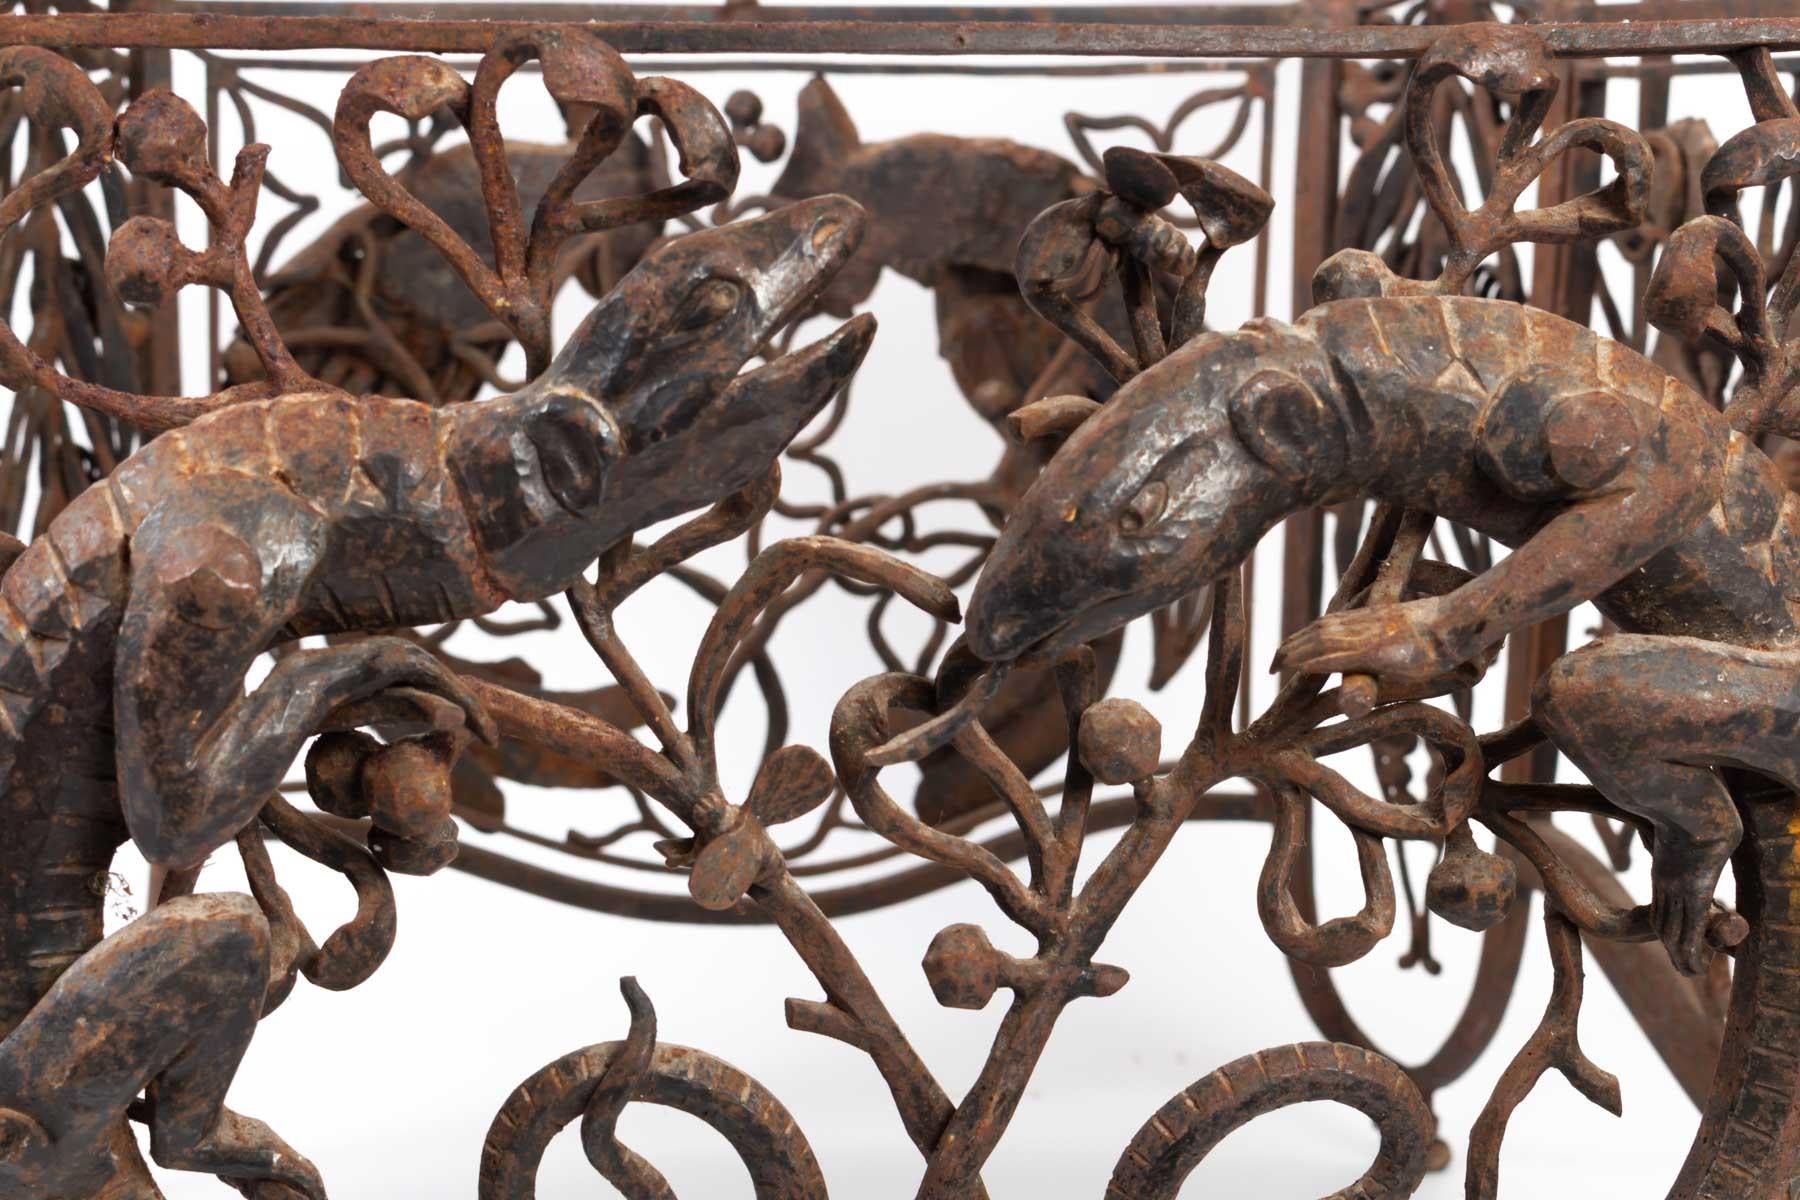 Raymond Subes (1891-1970), important chandelier cage, able to make a beautiful wrought and beaten iron coffee table with stylized and animated vegetation patterns of insects, salamanders, squirrels, parrots and iguanas, unique piece.
Measures: H